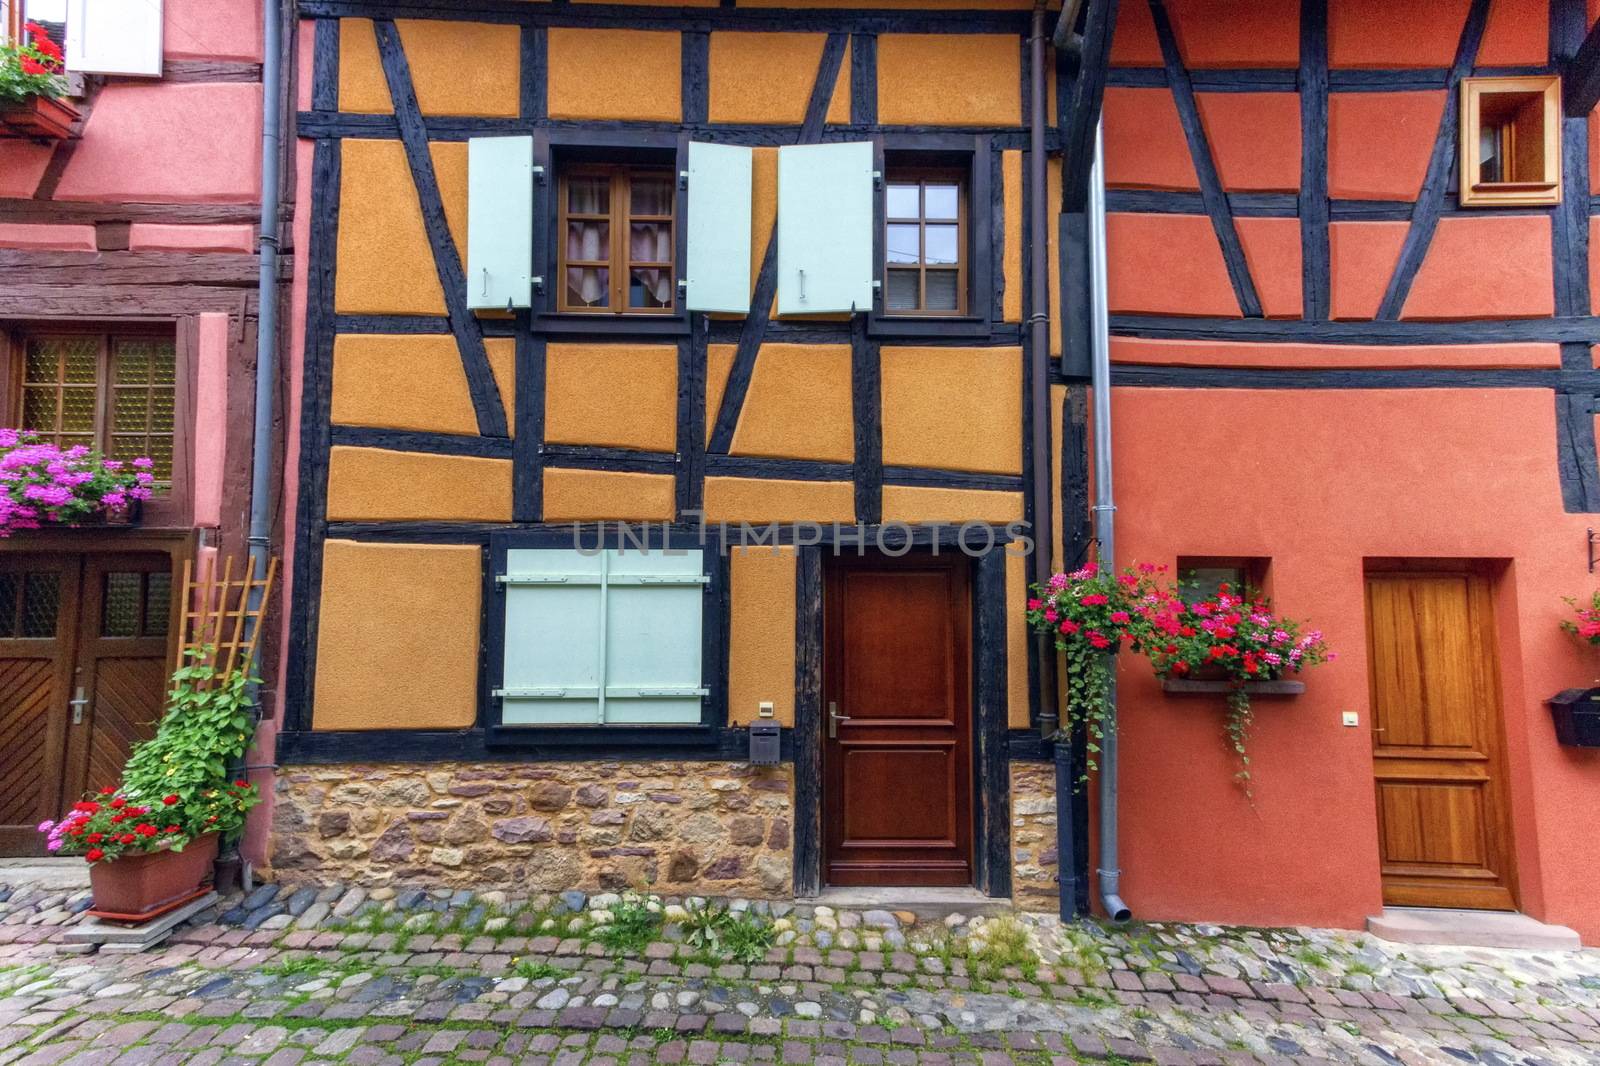 Timbered houses in Eguisheim street, Alsace, France by Elenaphotos21